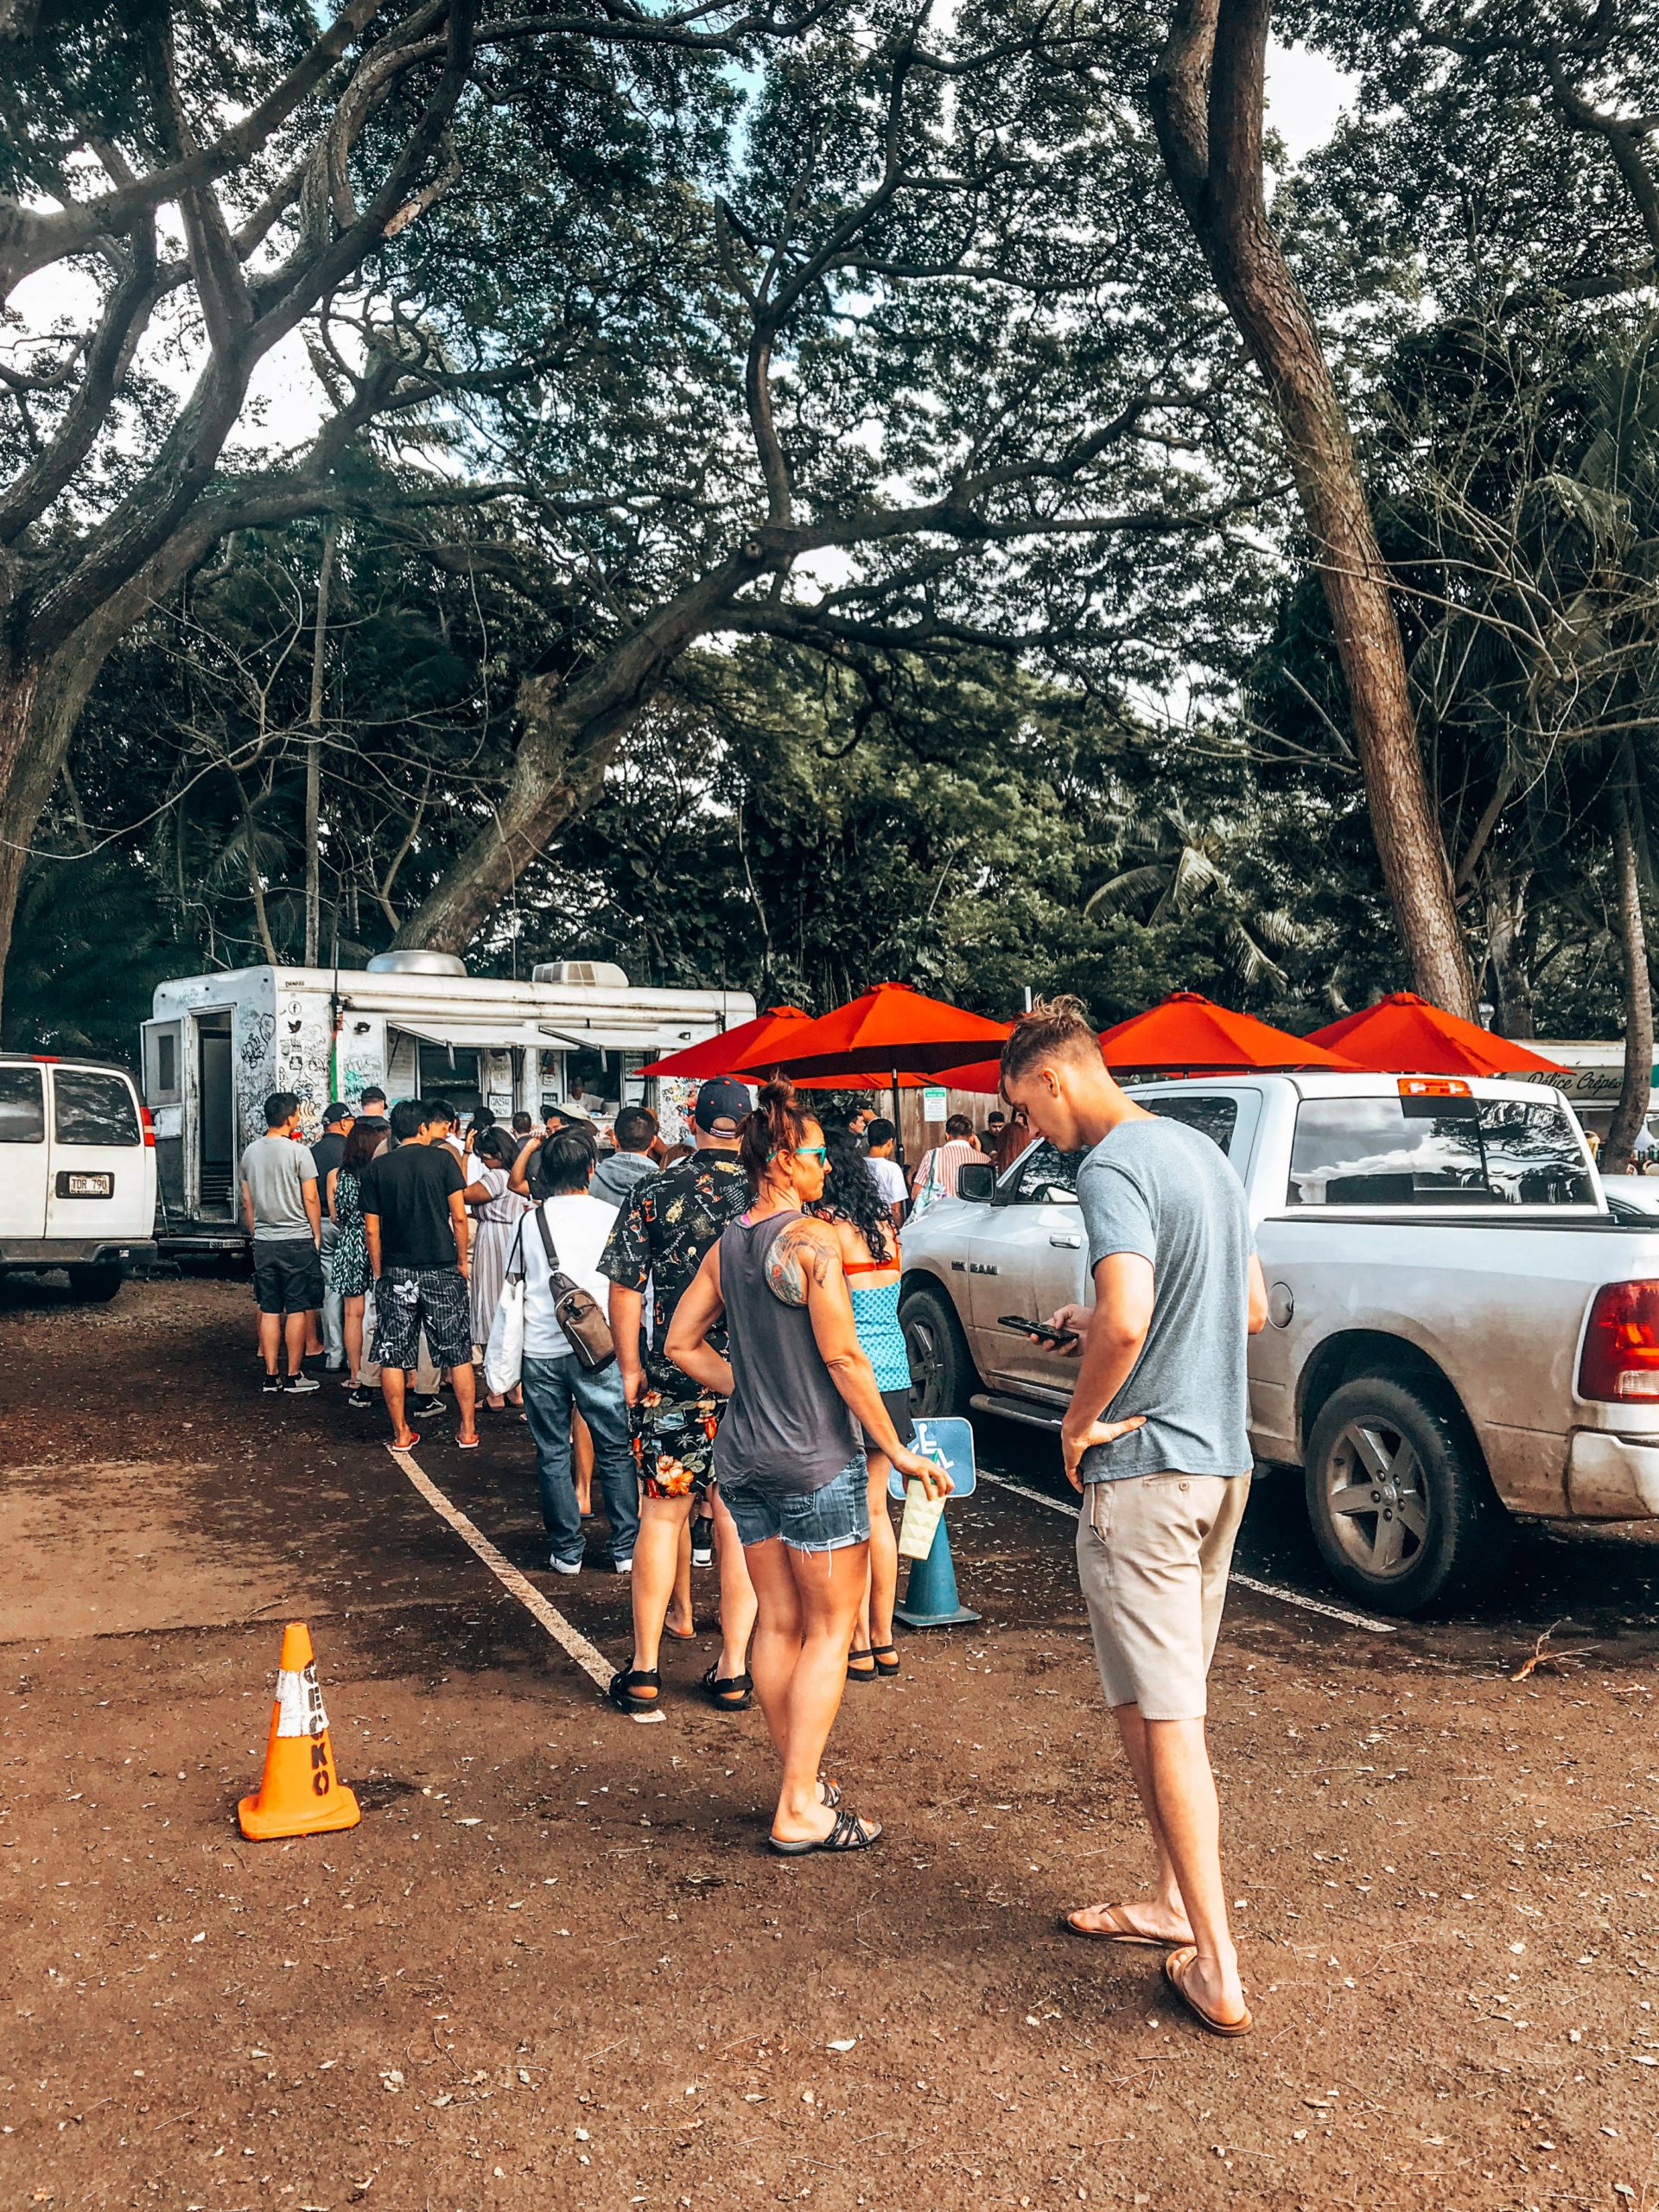 Individuals patiently waiting in line outside the shrimp truck.